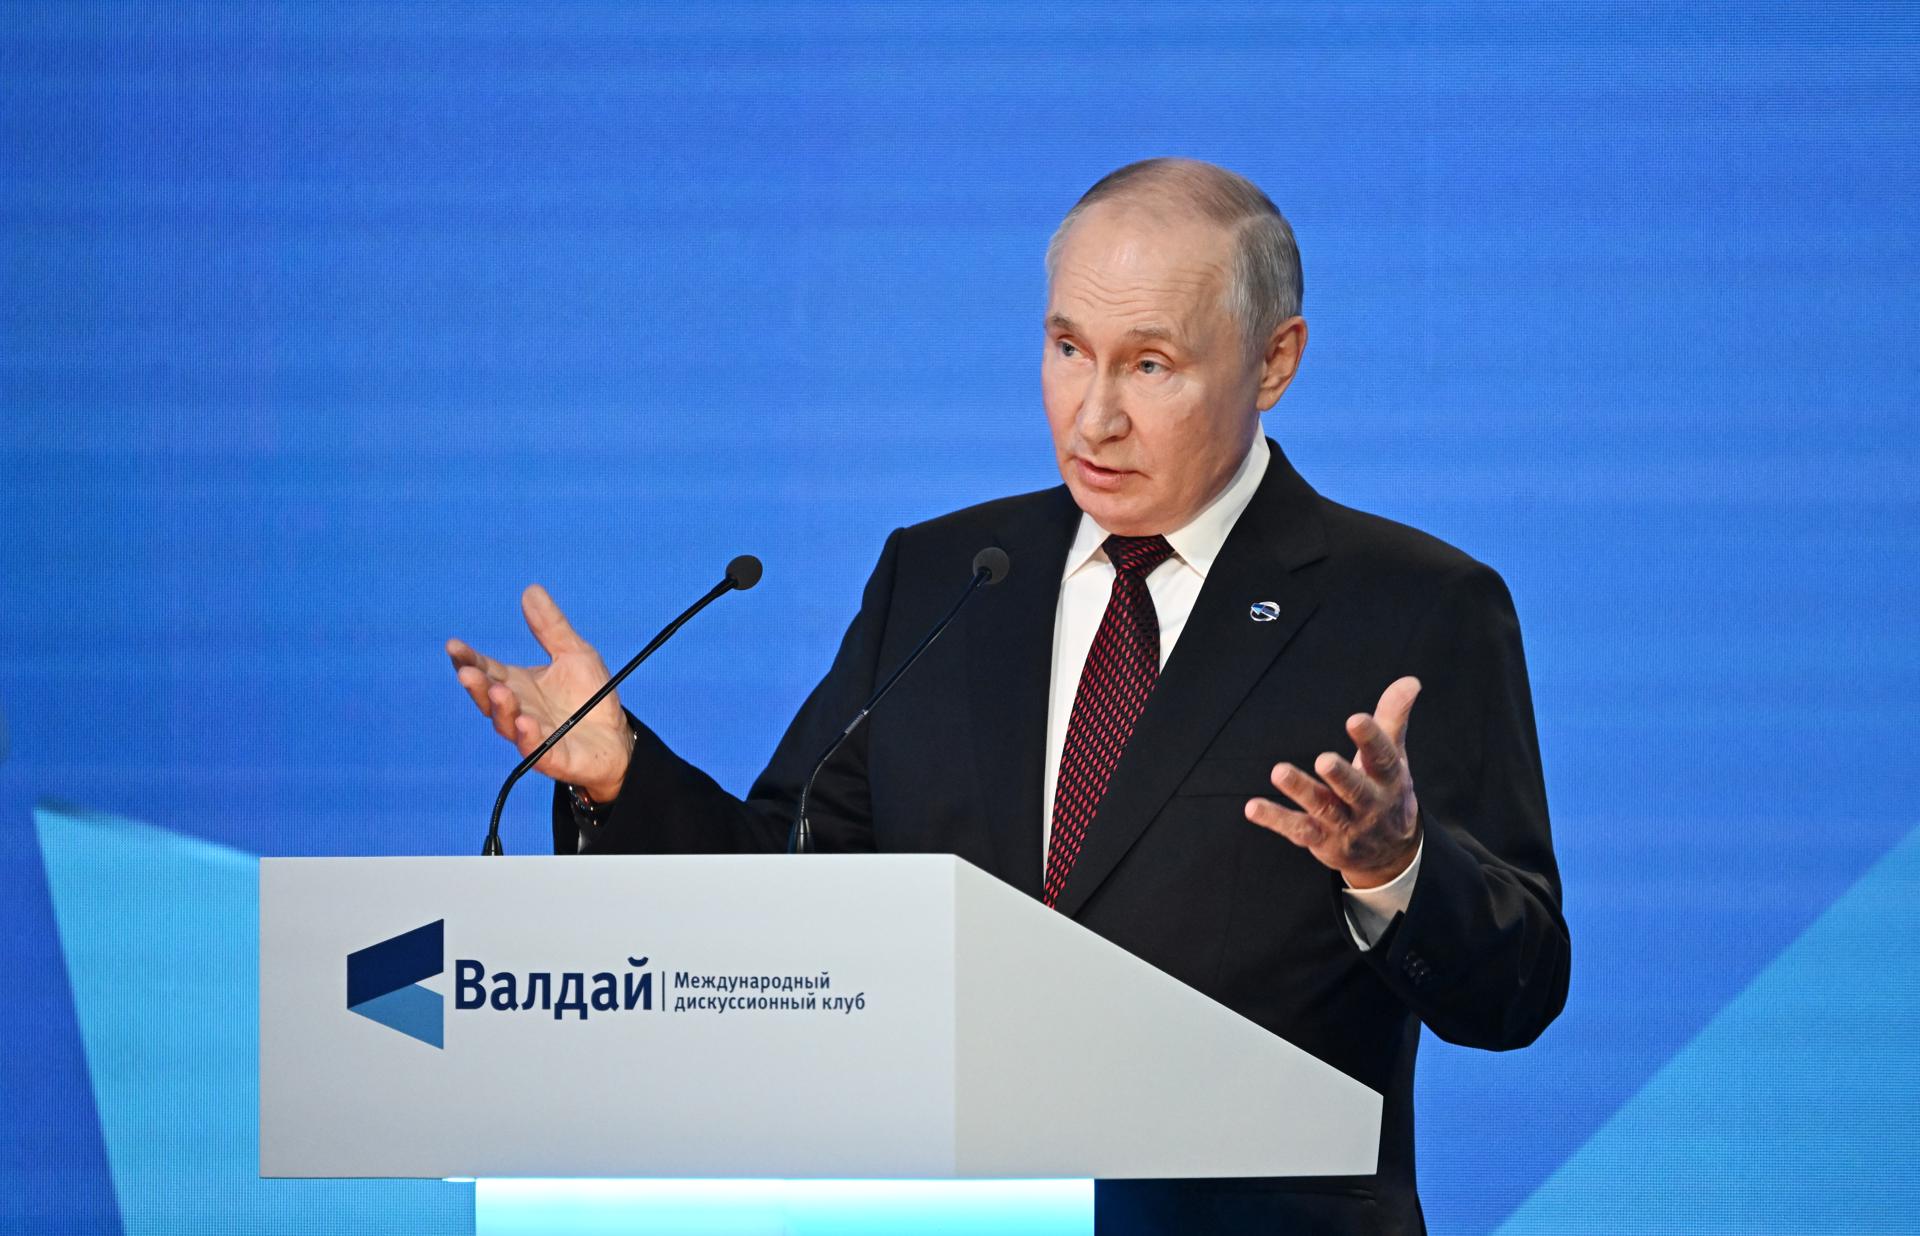 Russian President Vladimir Putin delivers a speech during a plenary session as part of the 20th annual meeting of the Valdai Discussion Club titled 'Fair Multipolarity: How to Ensure Security and Development for Everyone' in Sochi, Krasnodar region, Russia, 05 October 2023. EFE/EPA/GRIGORY SYSOEV/SPUTNIK/KREMLIN POOL MANDATORY CREDIT